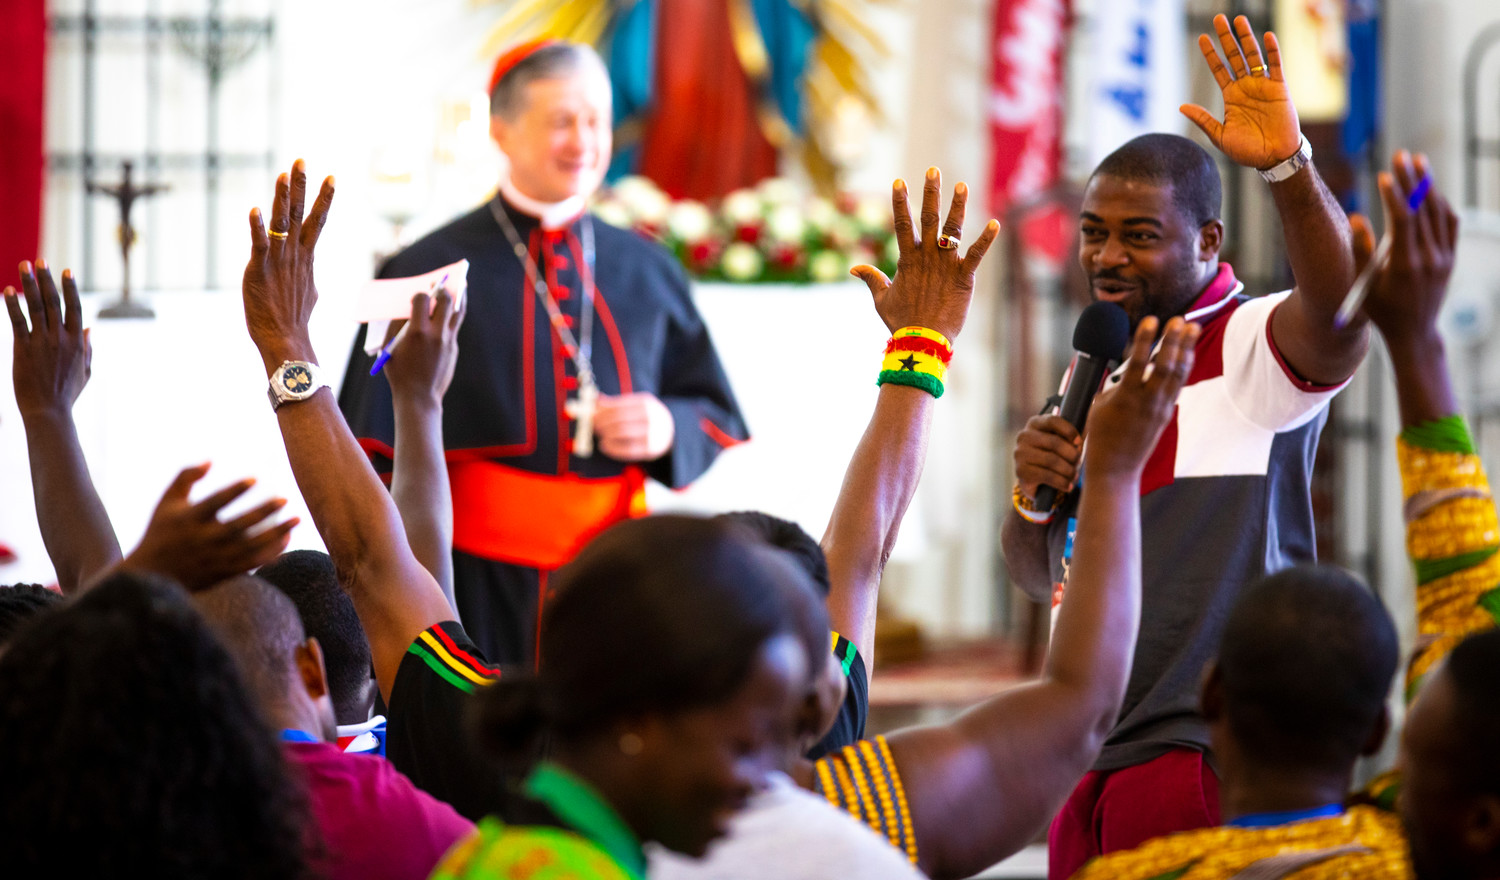 A pilgrim from Ghana asks others from his country to raise their hands during a World Youth Day catechesis session lead by Chicago Cardinal Blase J. Cupich at the Parish of Our Mother of Perpetual Help in Panama City Jan. 25, 2019.